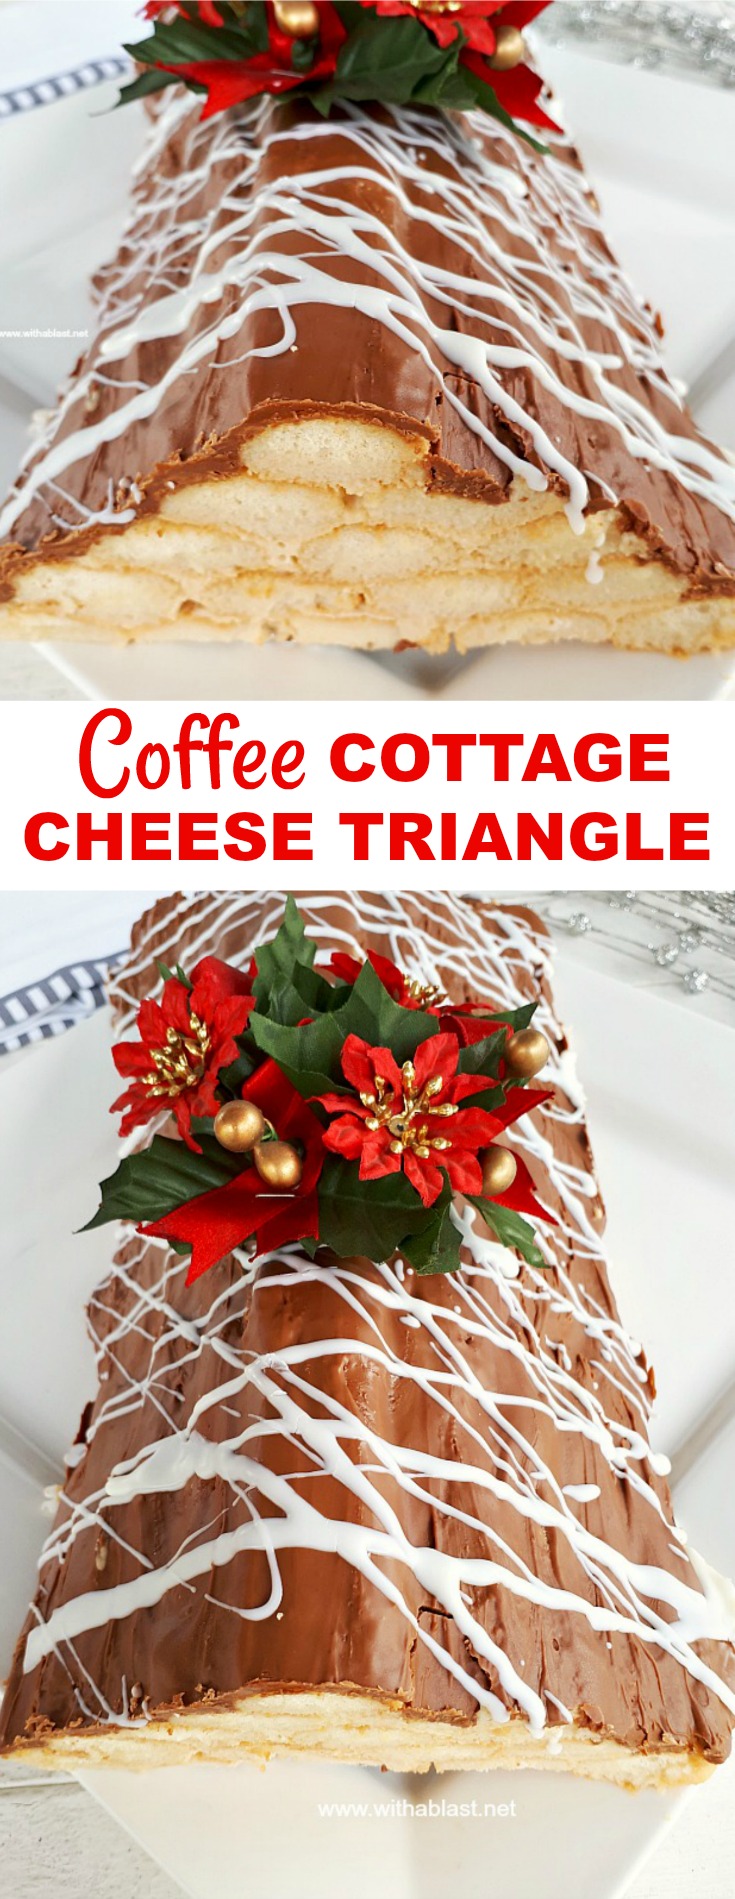 Coffee Cottage Cheese Triangle